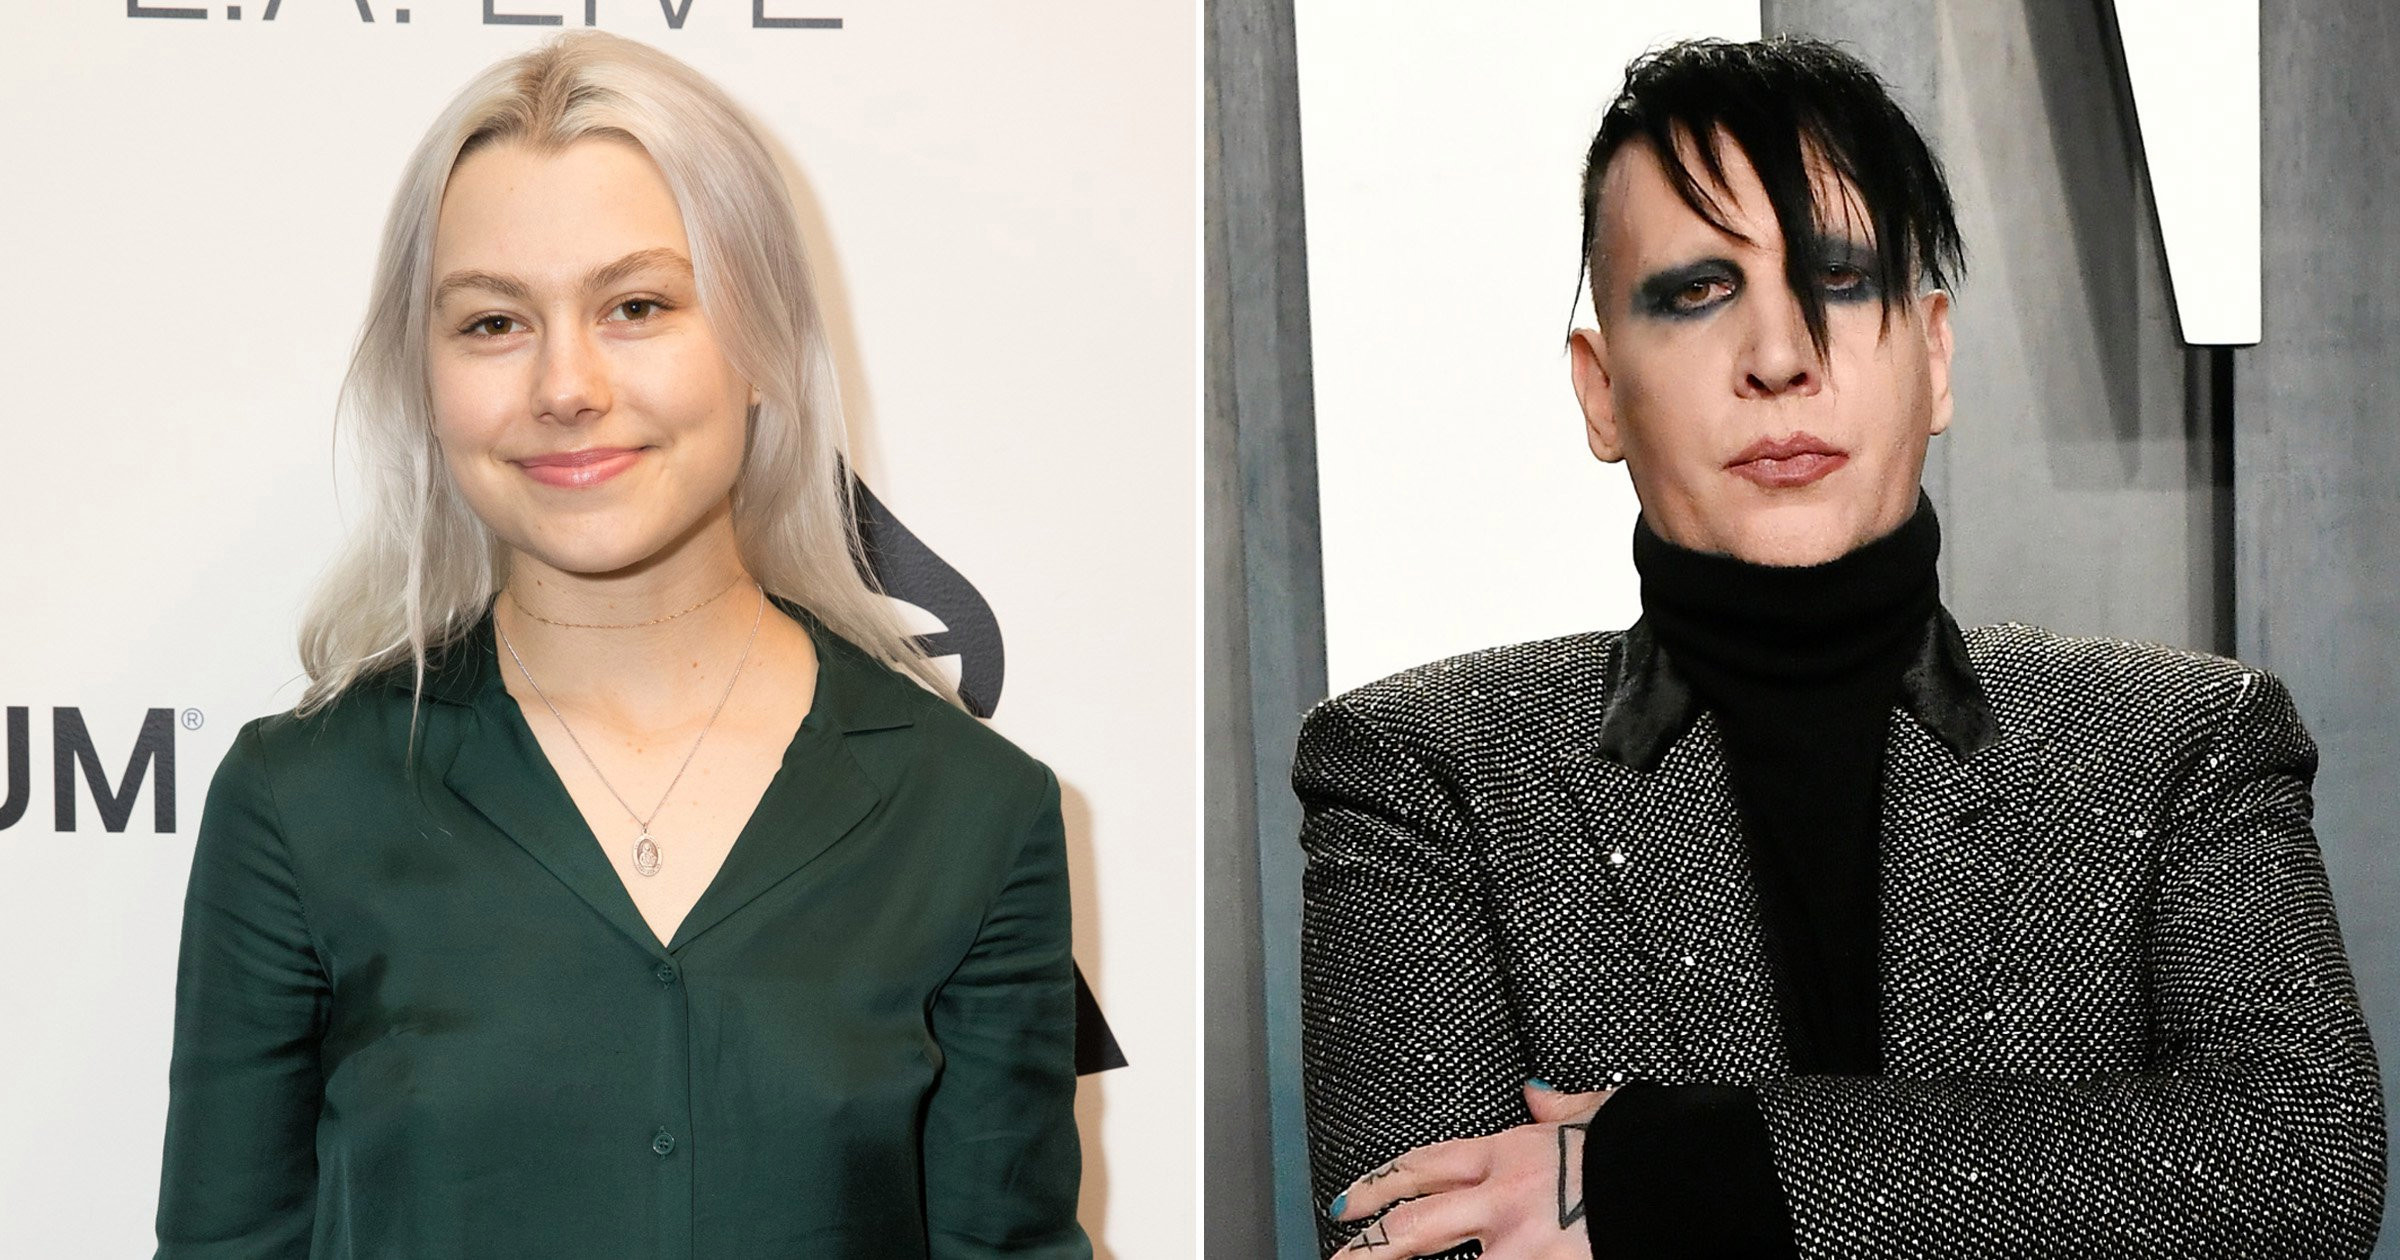 Phoebe Bridgers slams ‘performative activism’ as Marilyn Manson dropped by label after allegations